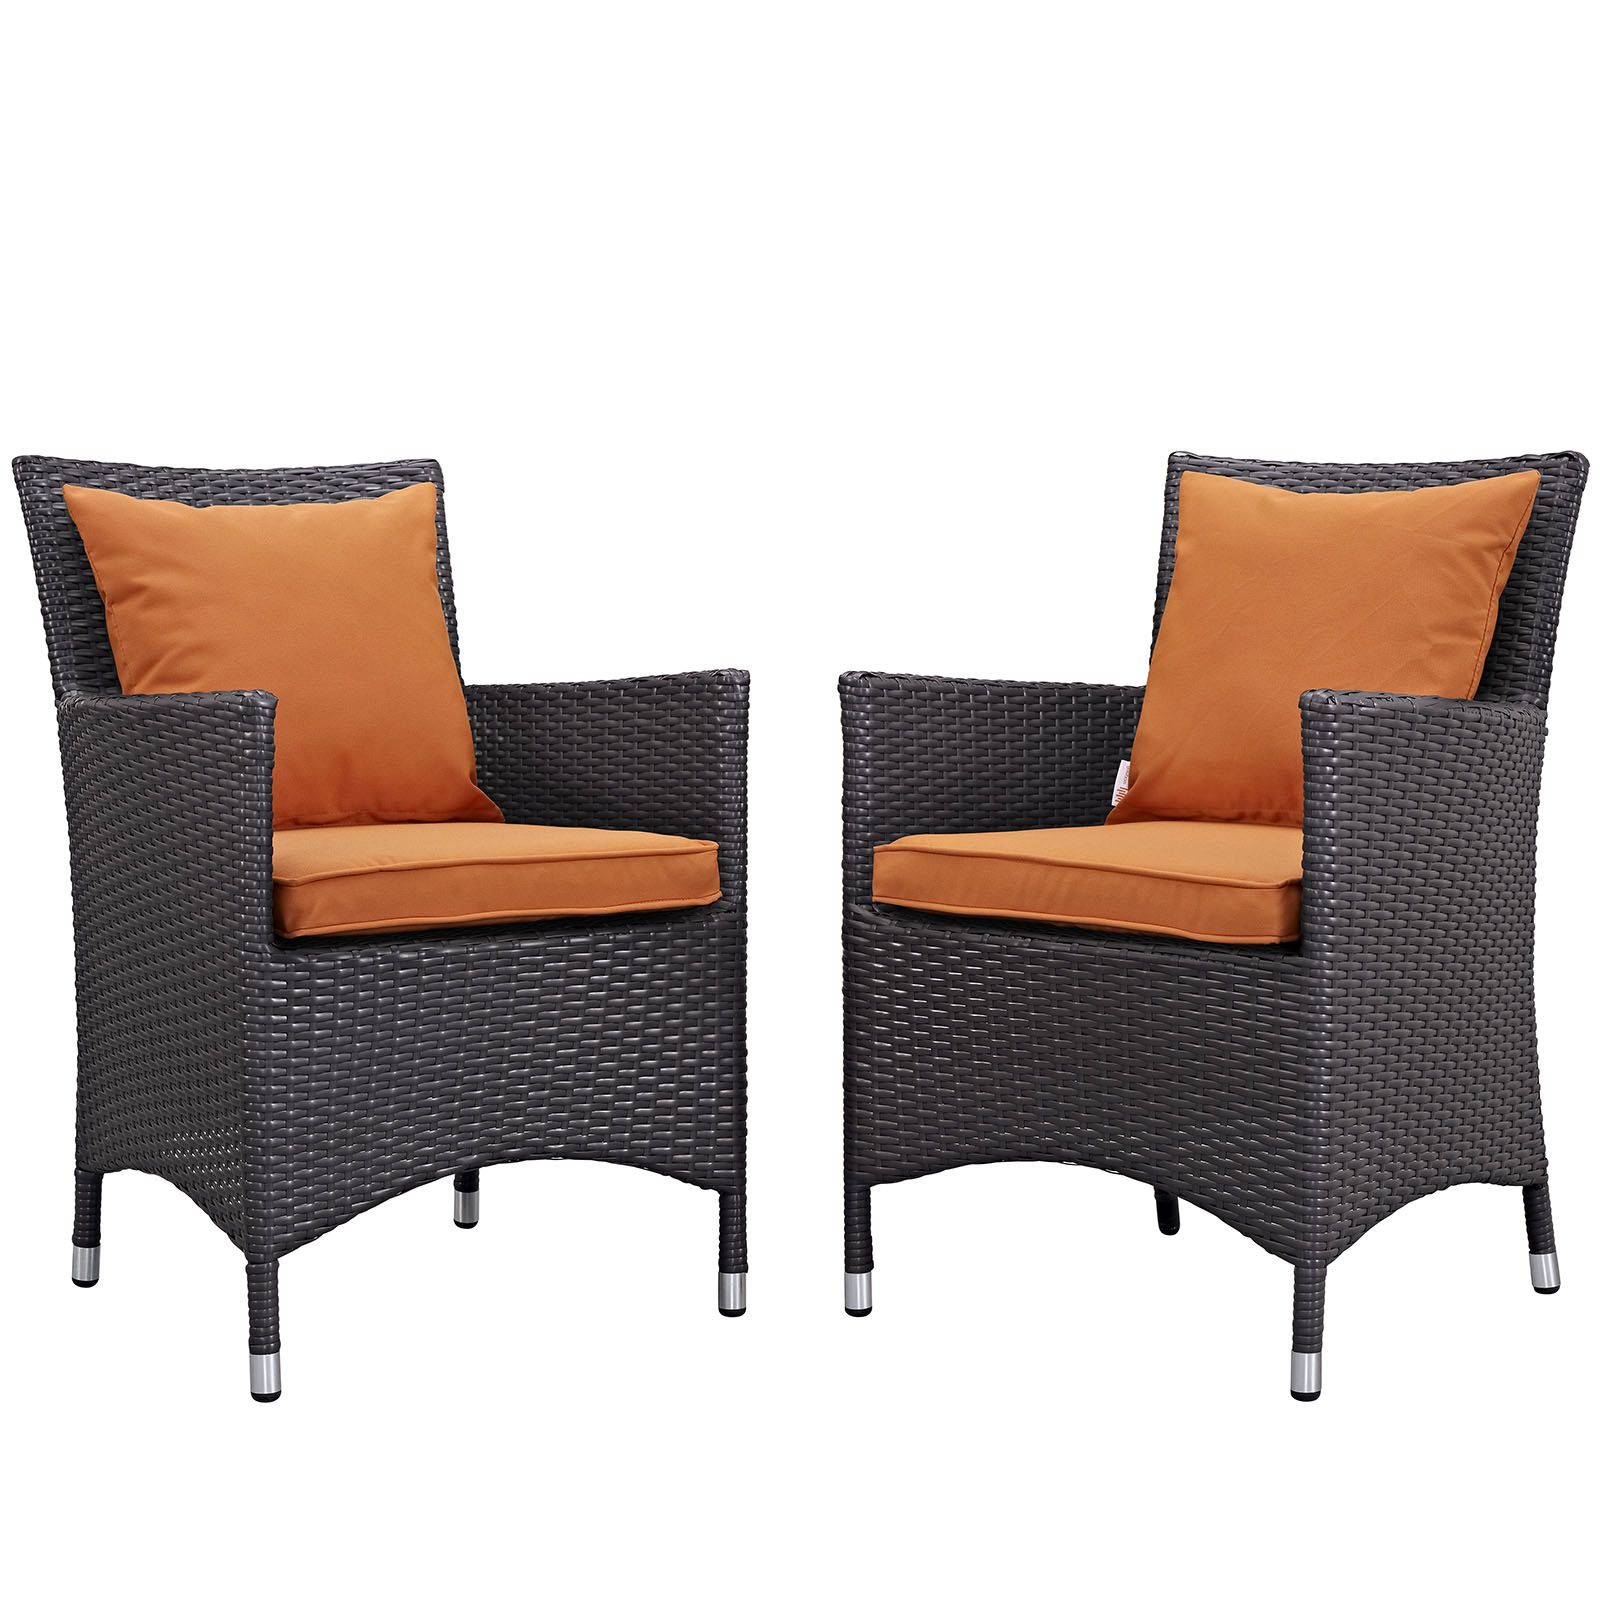 Trendy Mocha Fabric Outdoor Wicker Armchair Sets In Convene 2 Piece Outdoor Patio Dining Set Mocha Arm Chairs (View 1 of 15)